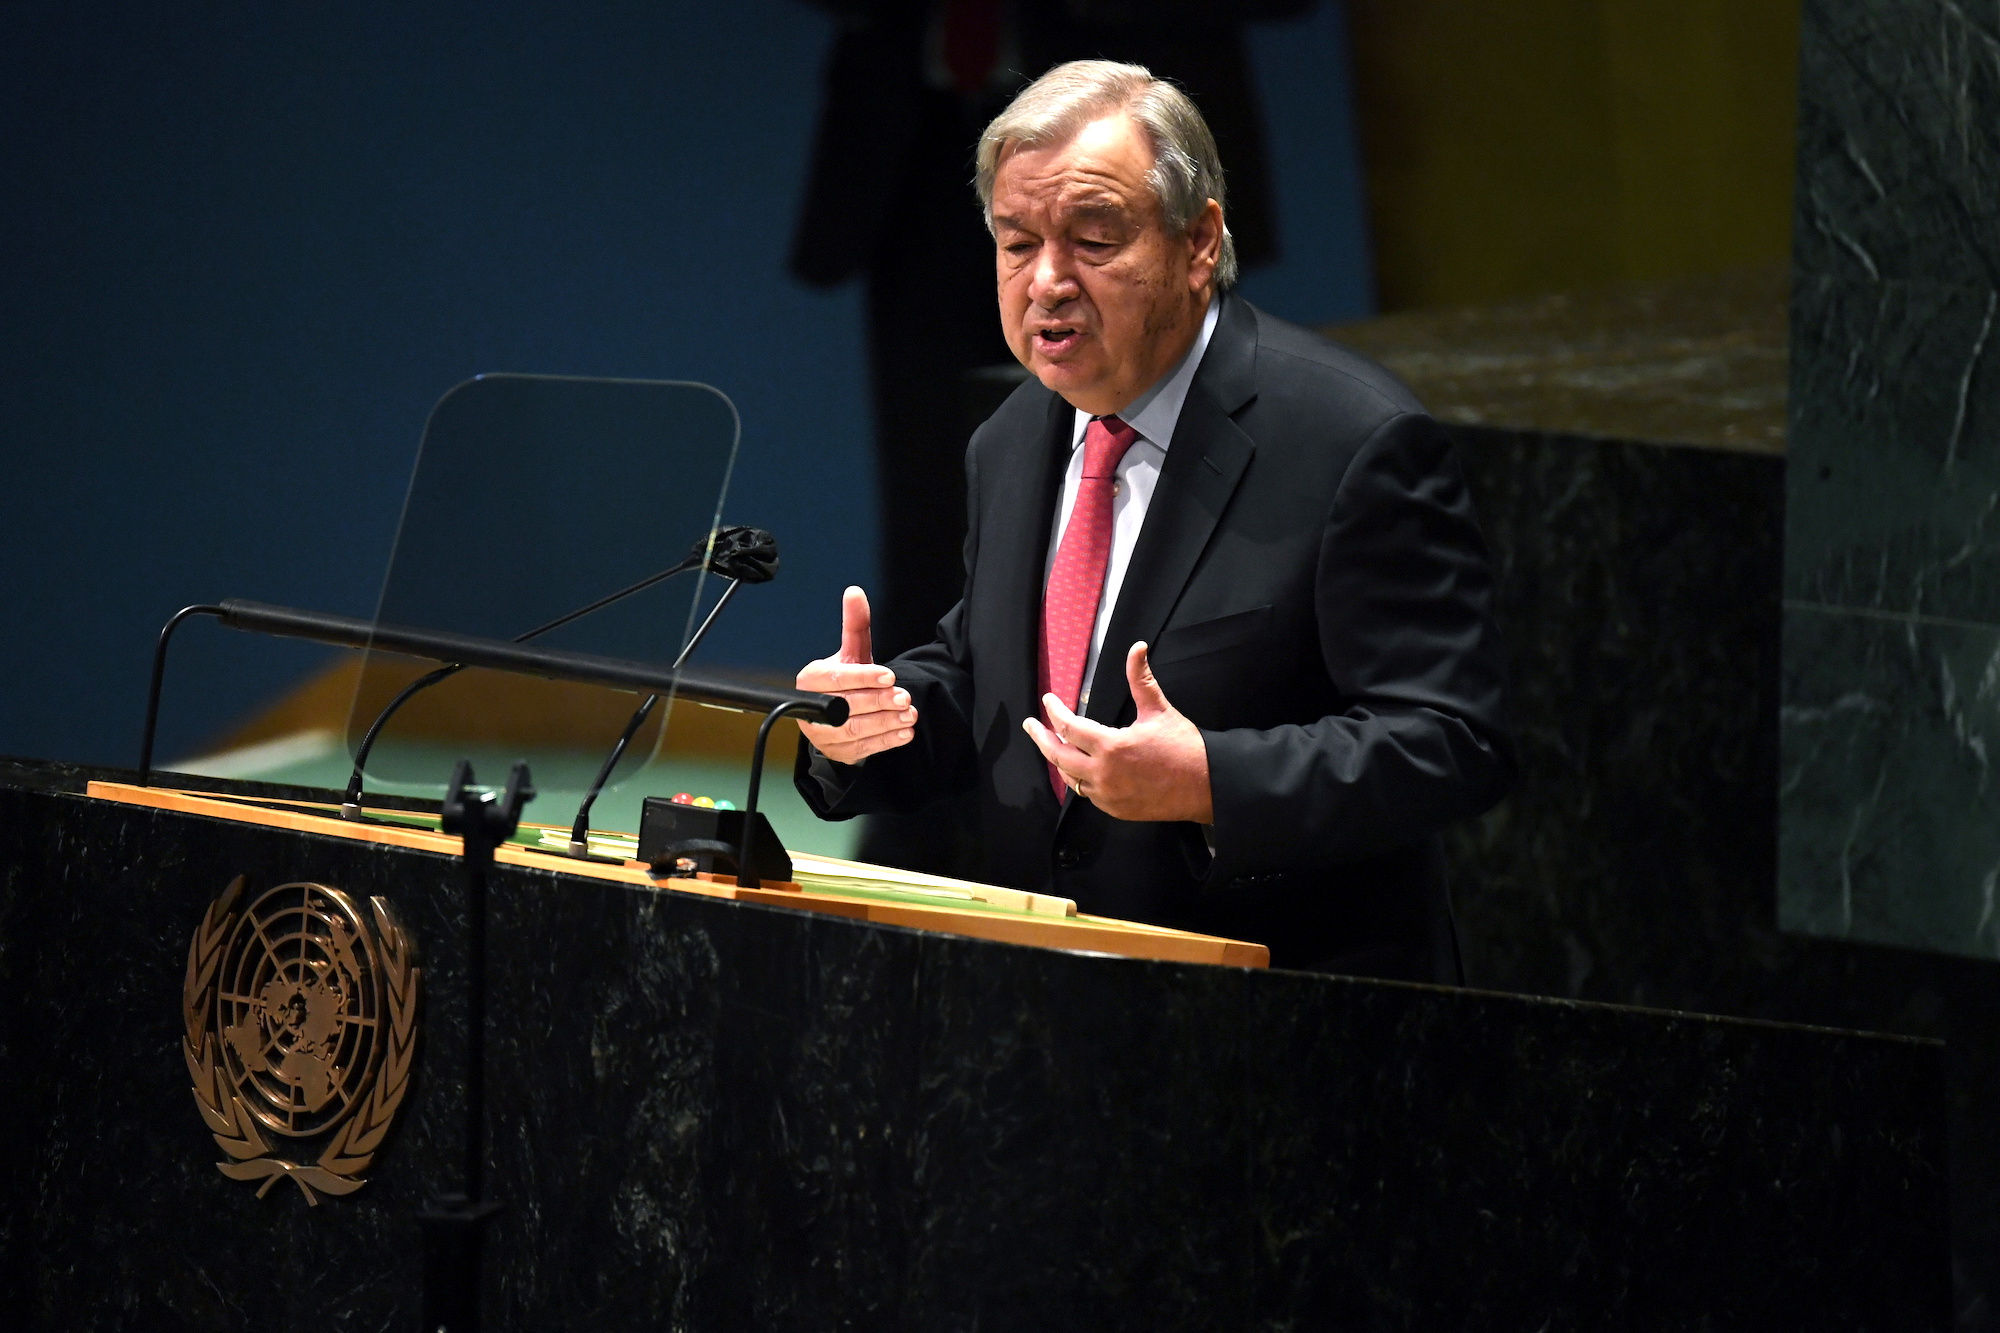 United Nations Secretary General Antonio Guterres speaks during the 76th Session of the General Assembly at UN Headquarters in New York